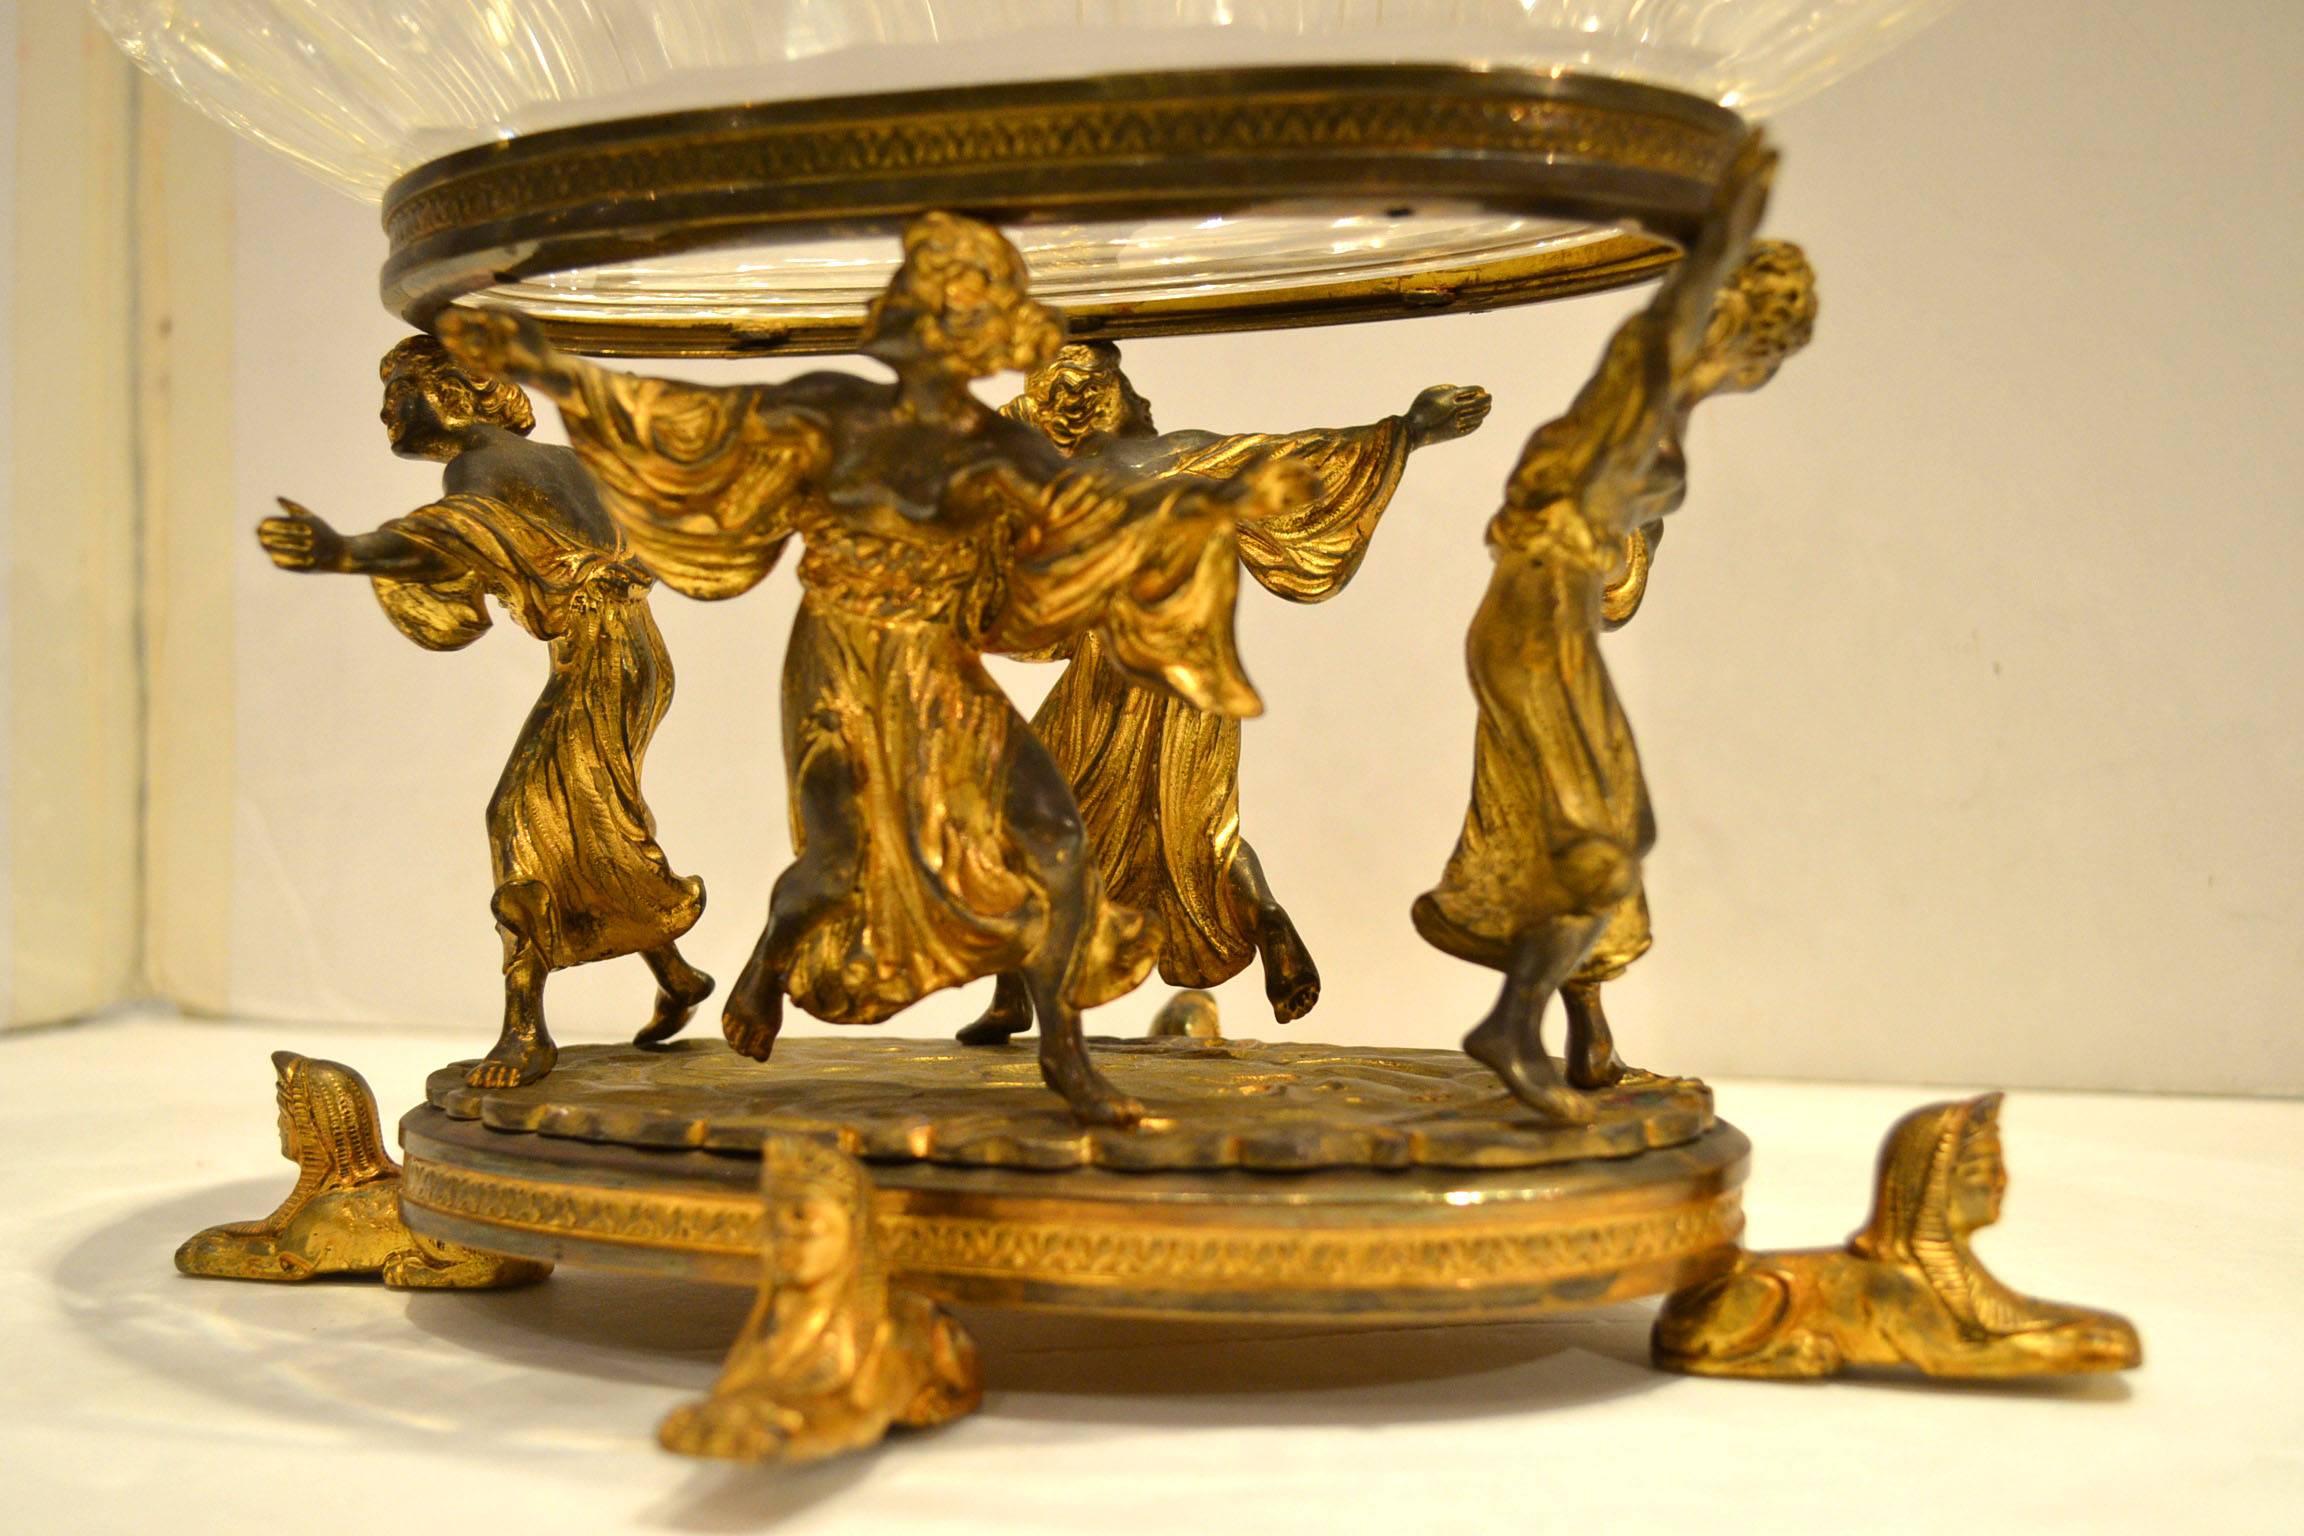 20th Century French Egyptian Revival Gilt Bronze and Crystal Figural Centerpiece